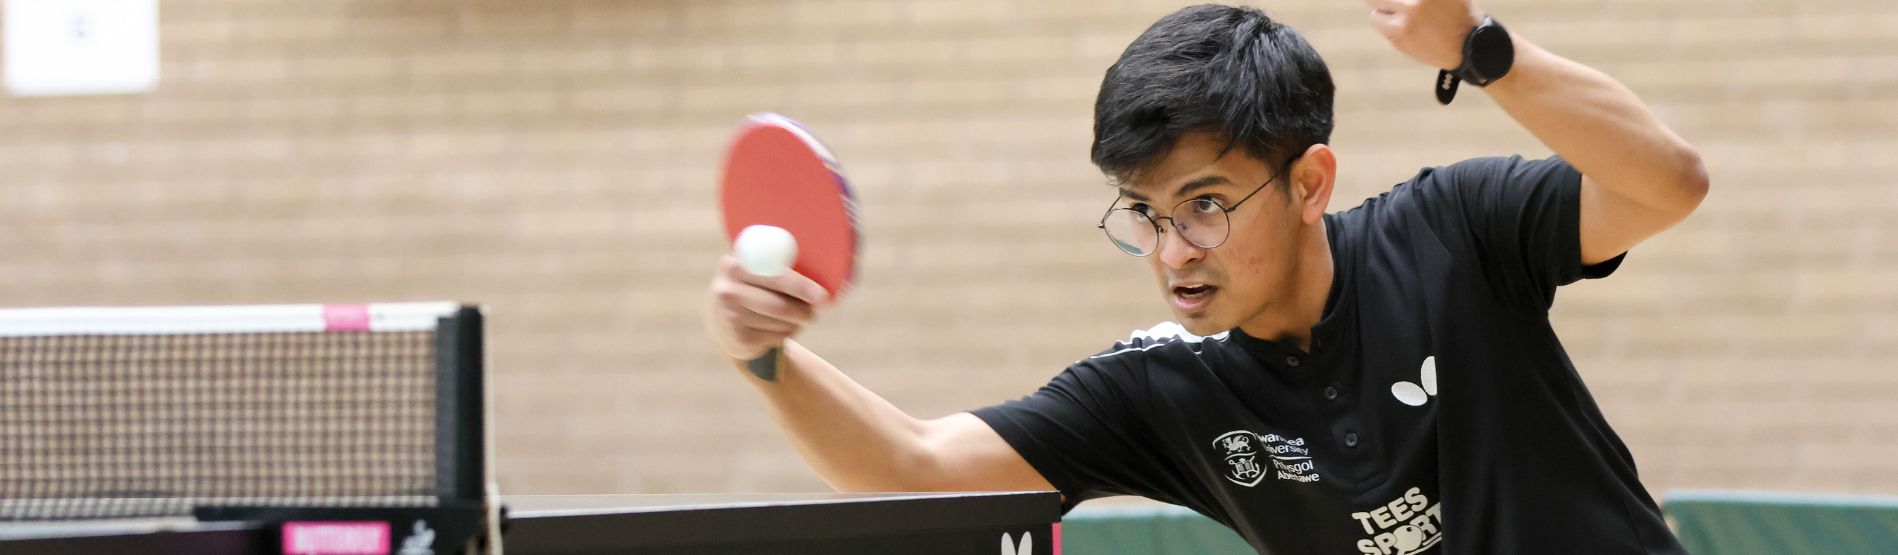 A high performing athlete at Swansea University playing table tennis